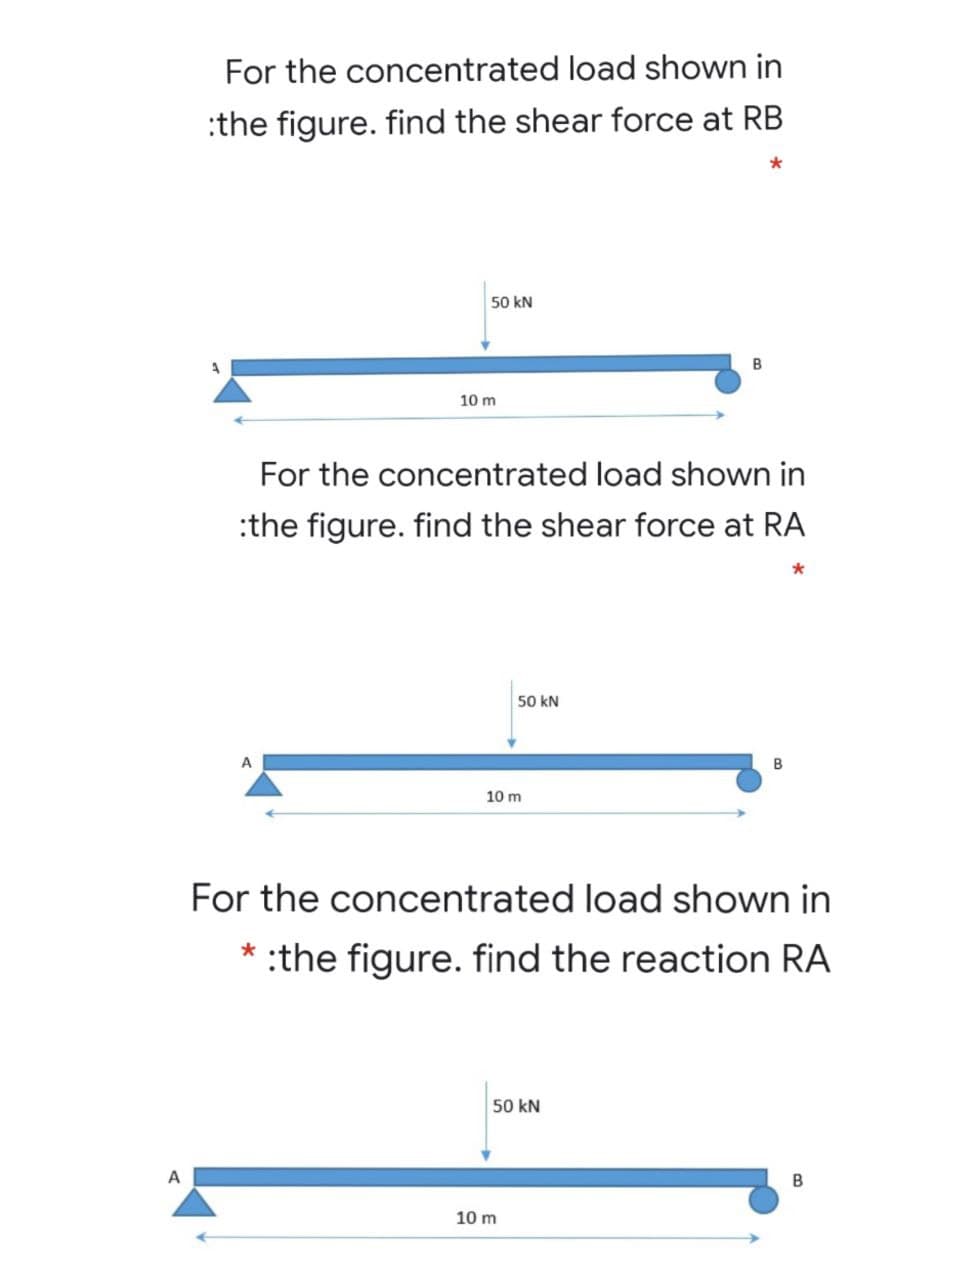 For the concentrated load shown in
:the figure. find the shear force at RB
50 kN
B
10 m
For the concentrated load shown in
:the figure. find the shear force at RA
50 kN
A
10 m
For the concentrated load shown in
* :the figure. find the reaction RA
50 kN
10 m
